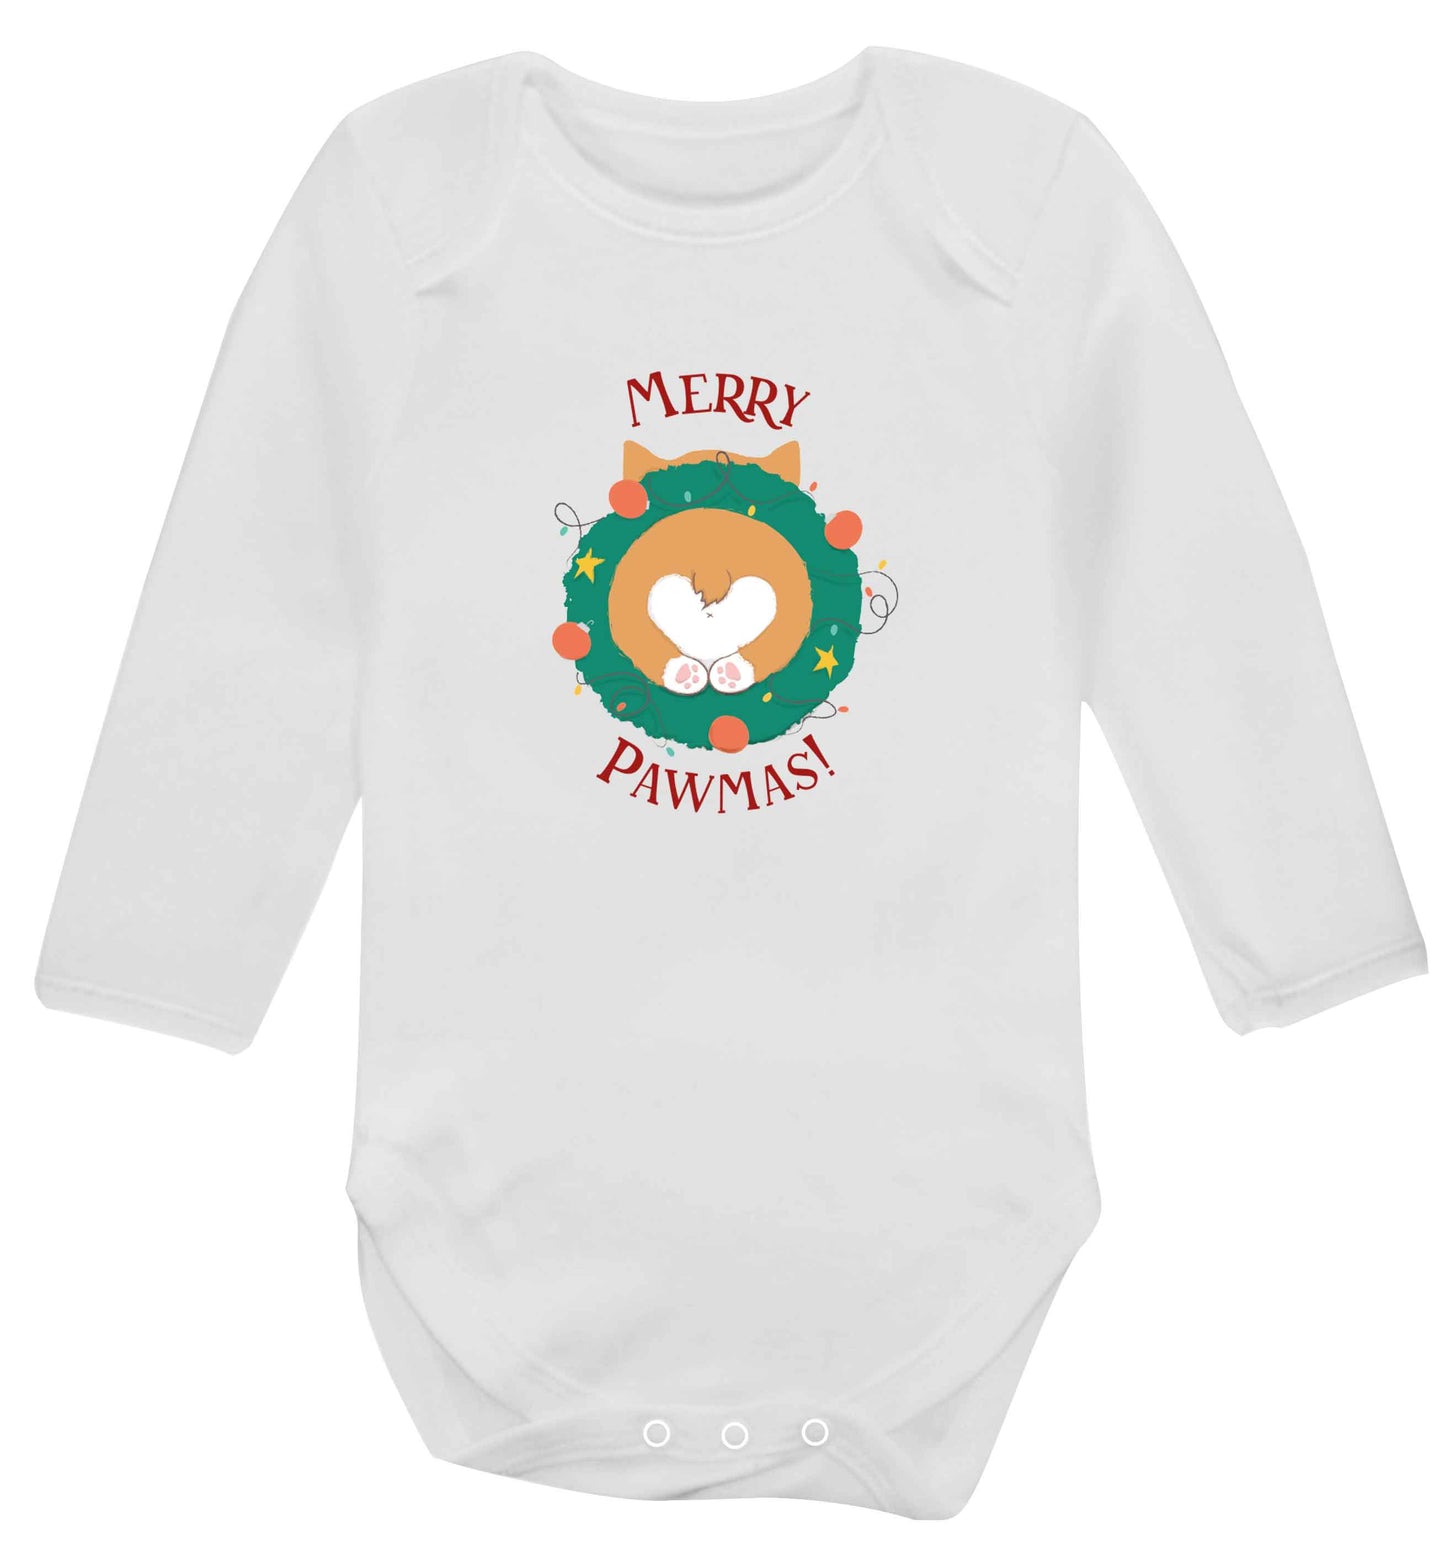 Merry Pawmas baby vest long sleeved white 6-12 months